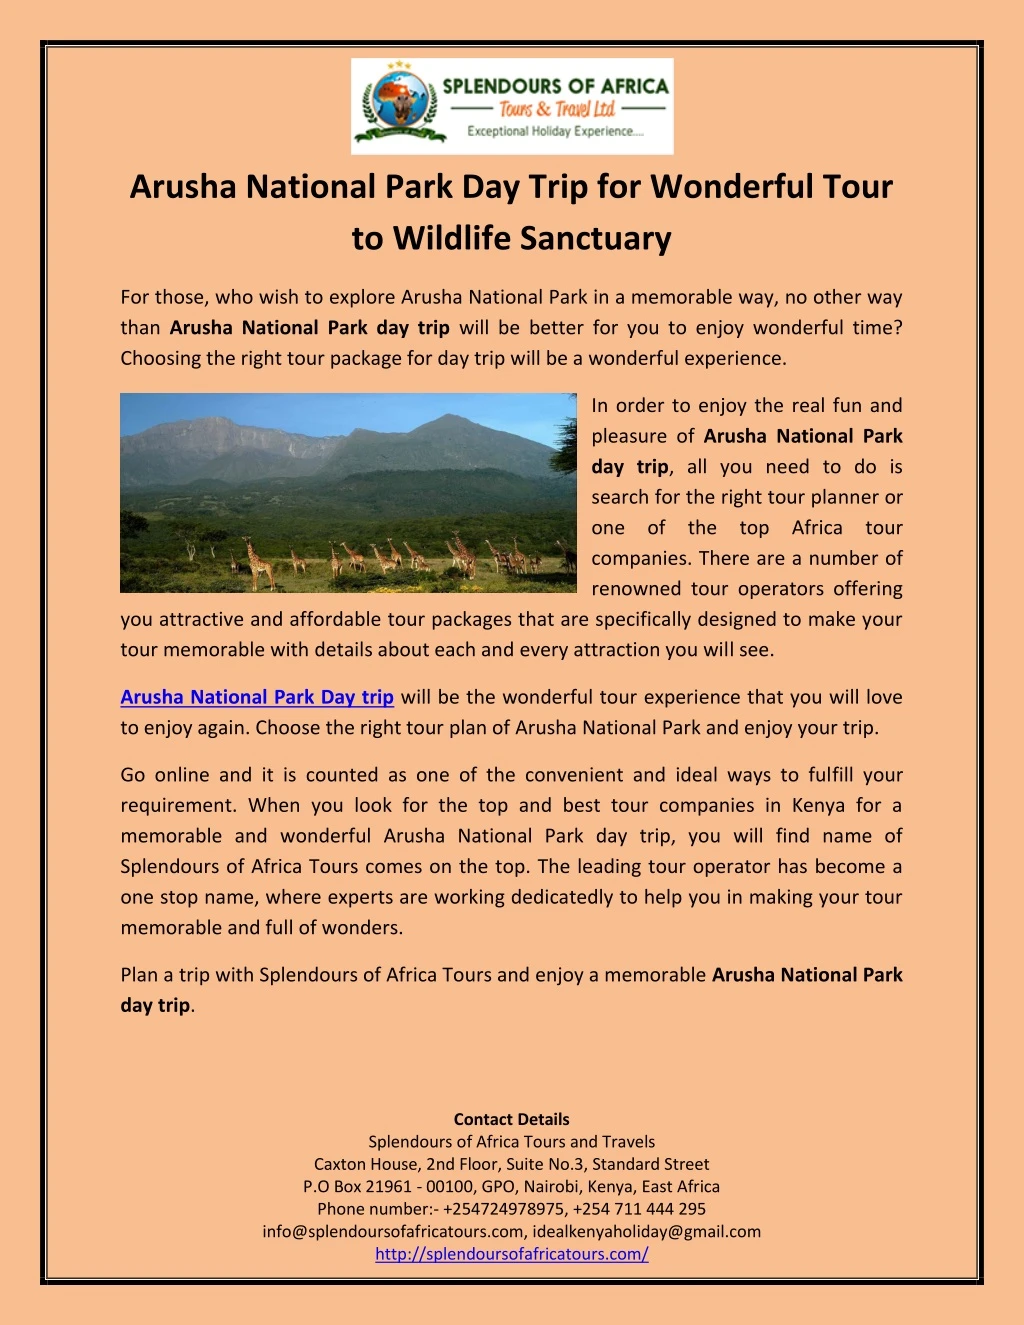 arusha national park day trip for wonderful tour